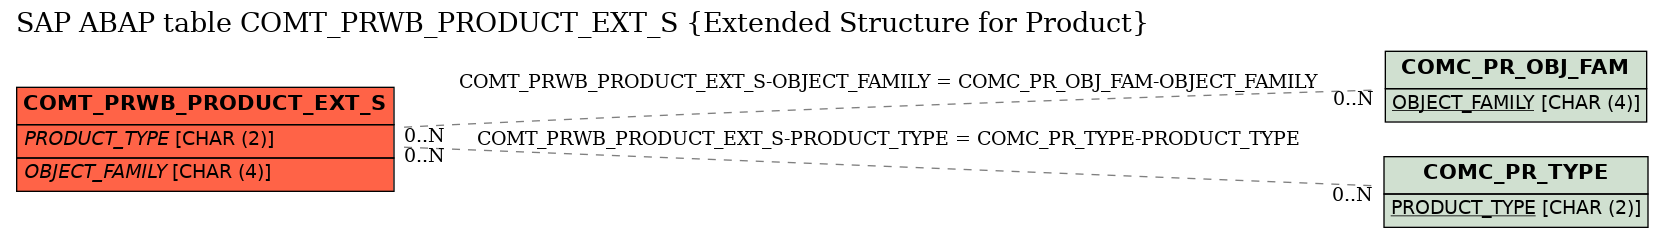 E-R Diagram for table COMT_PRWB_PRODUCT_EXT_S (Extended Structure for Product)